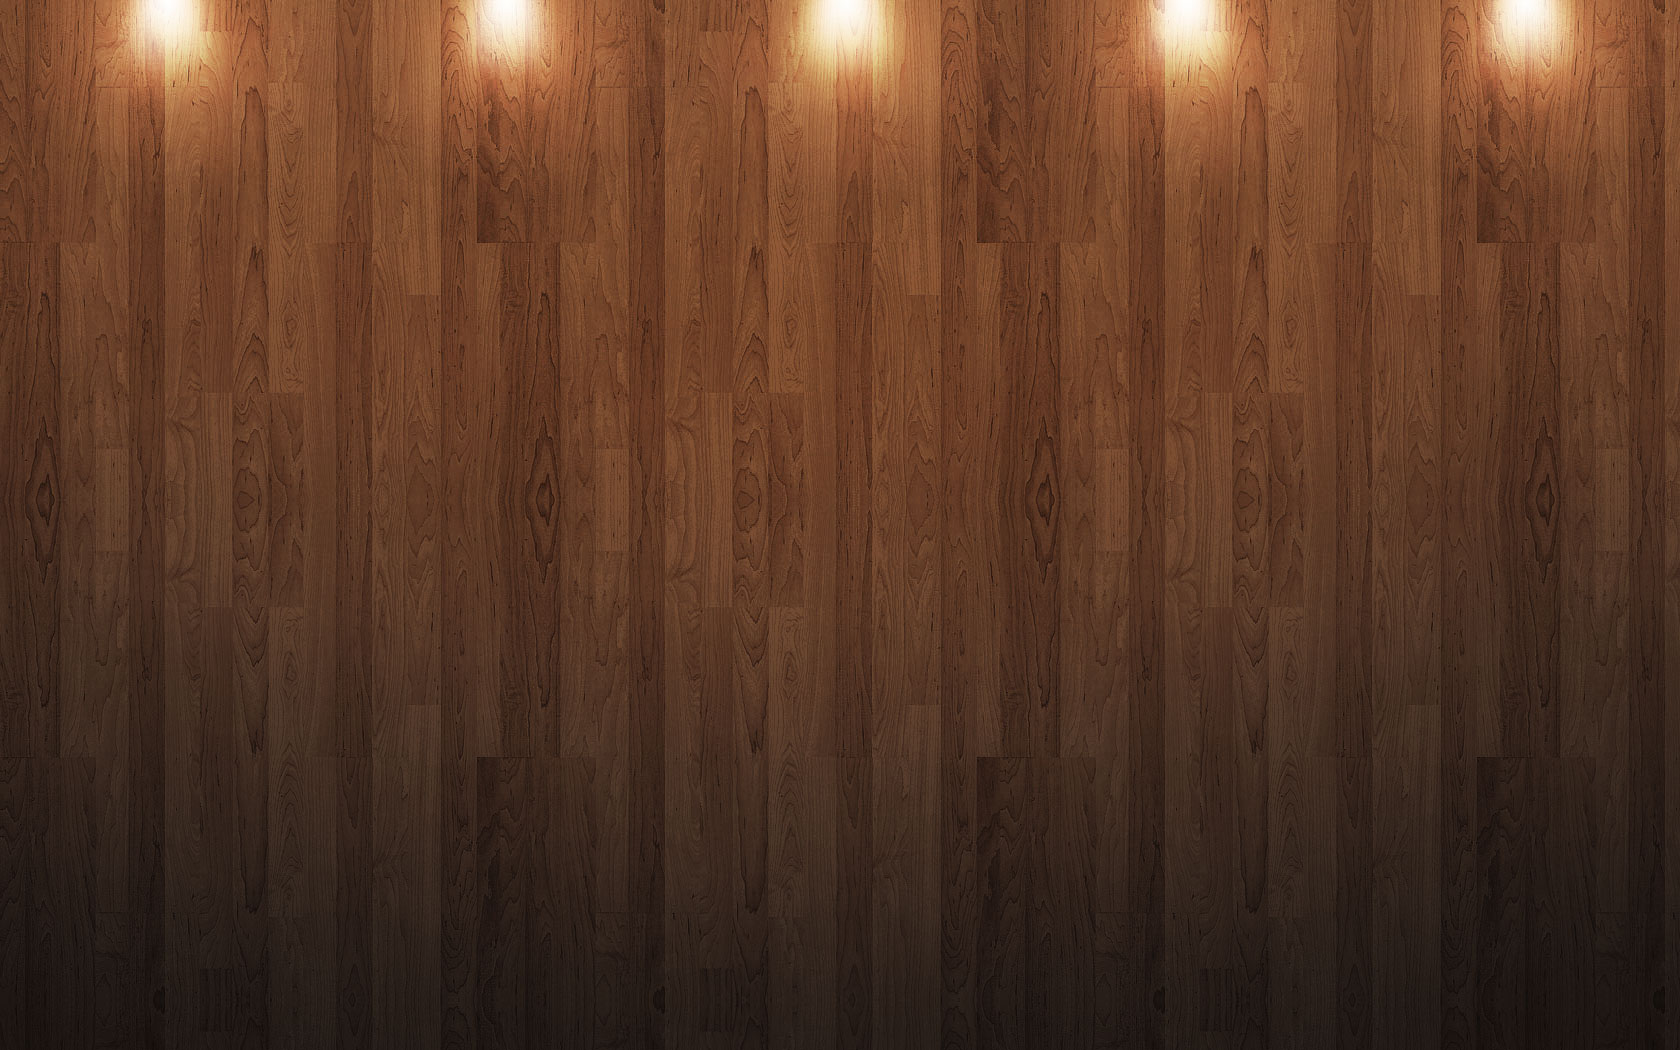 Wooden With Lights Wallpaper PPT Backgrounds